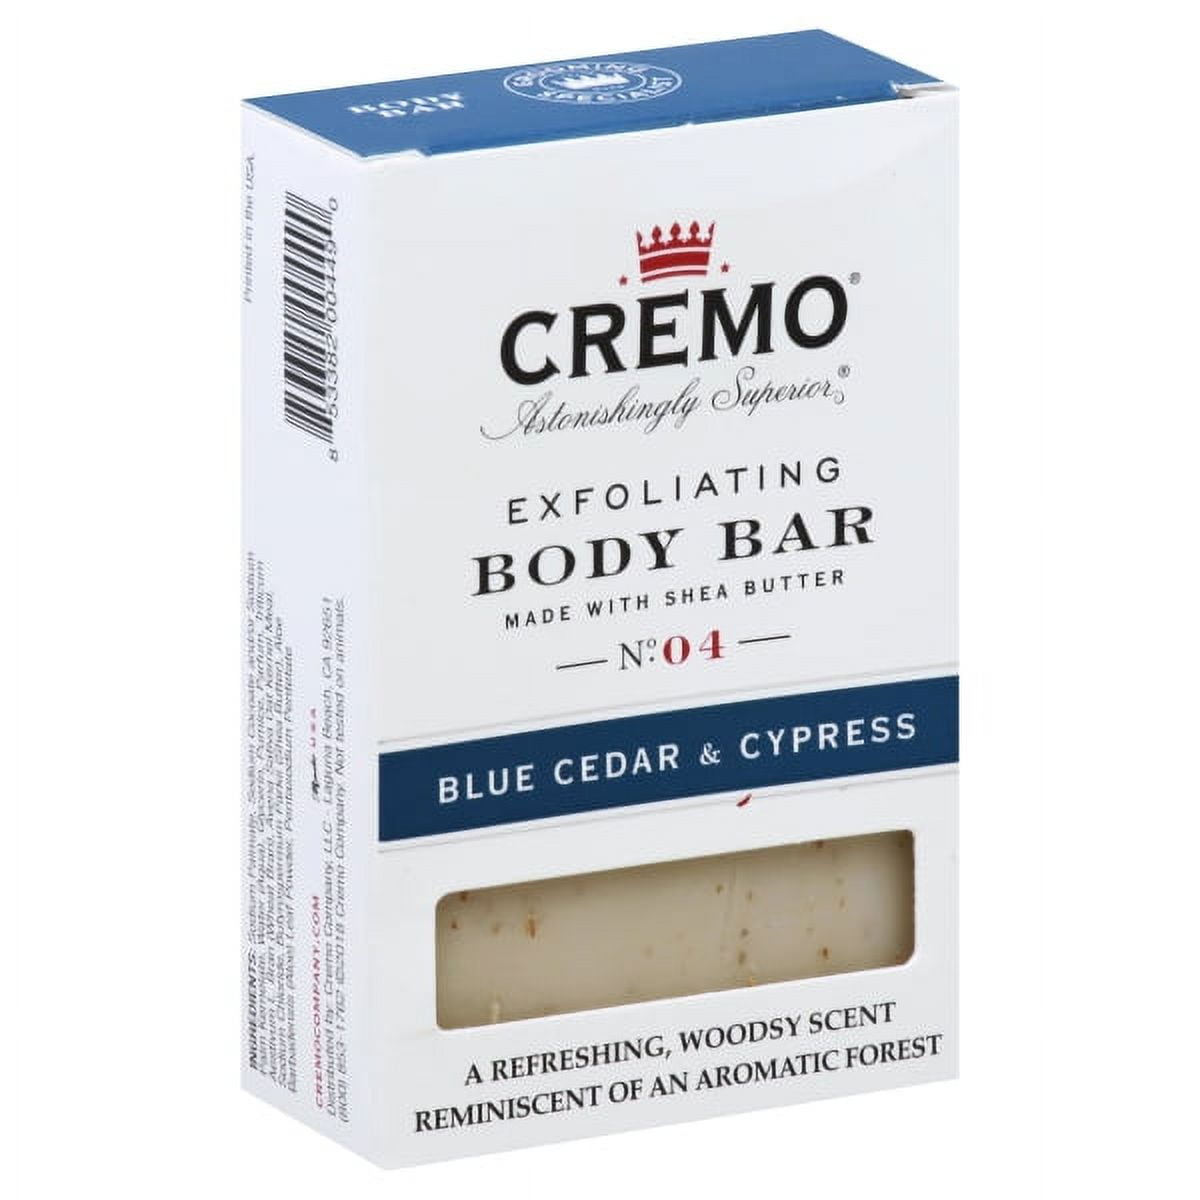  Cremo Exfoliating Body Bar With Shea Butter - Bourbon & Oak, 6  ounce : Beauty & Personal Care